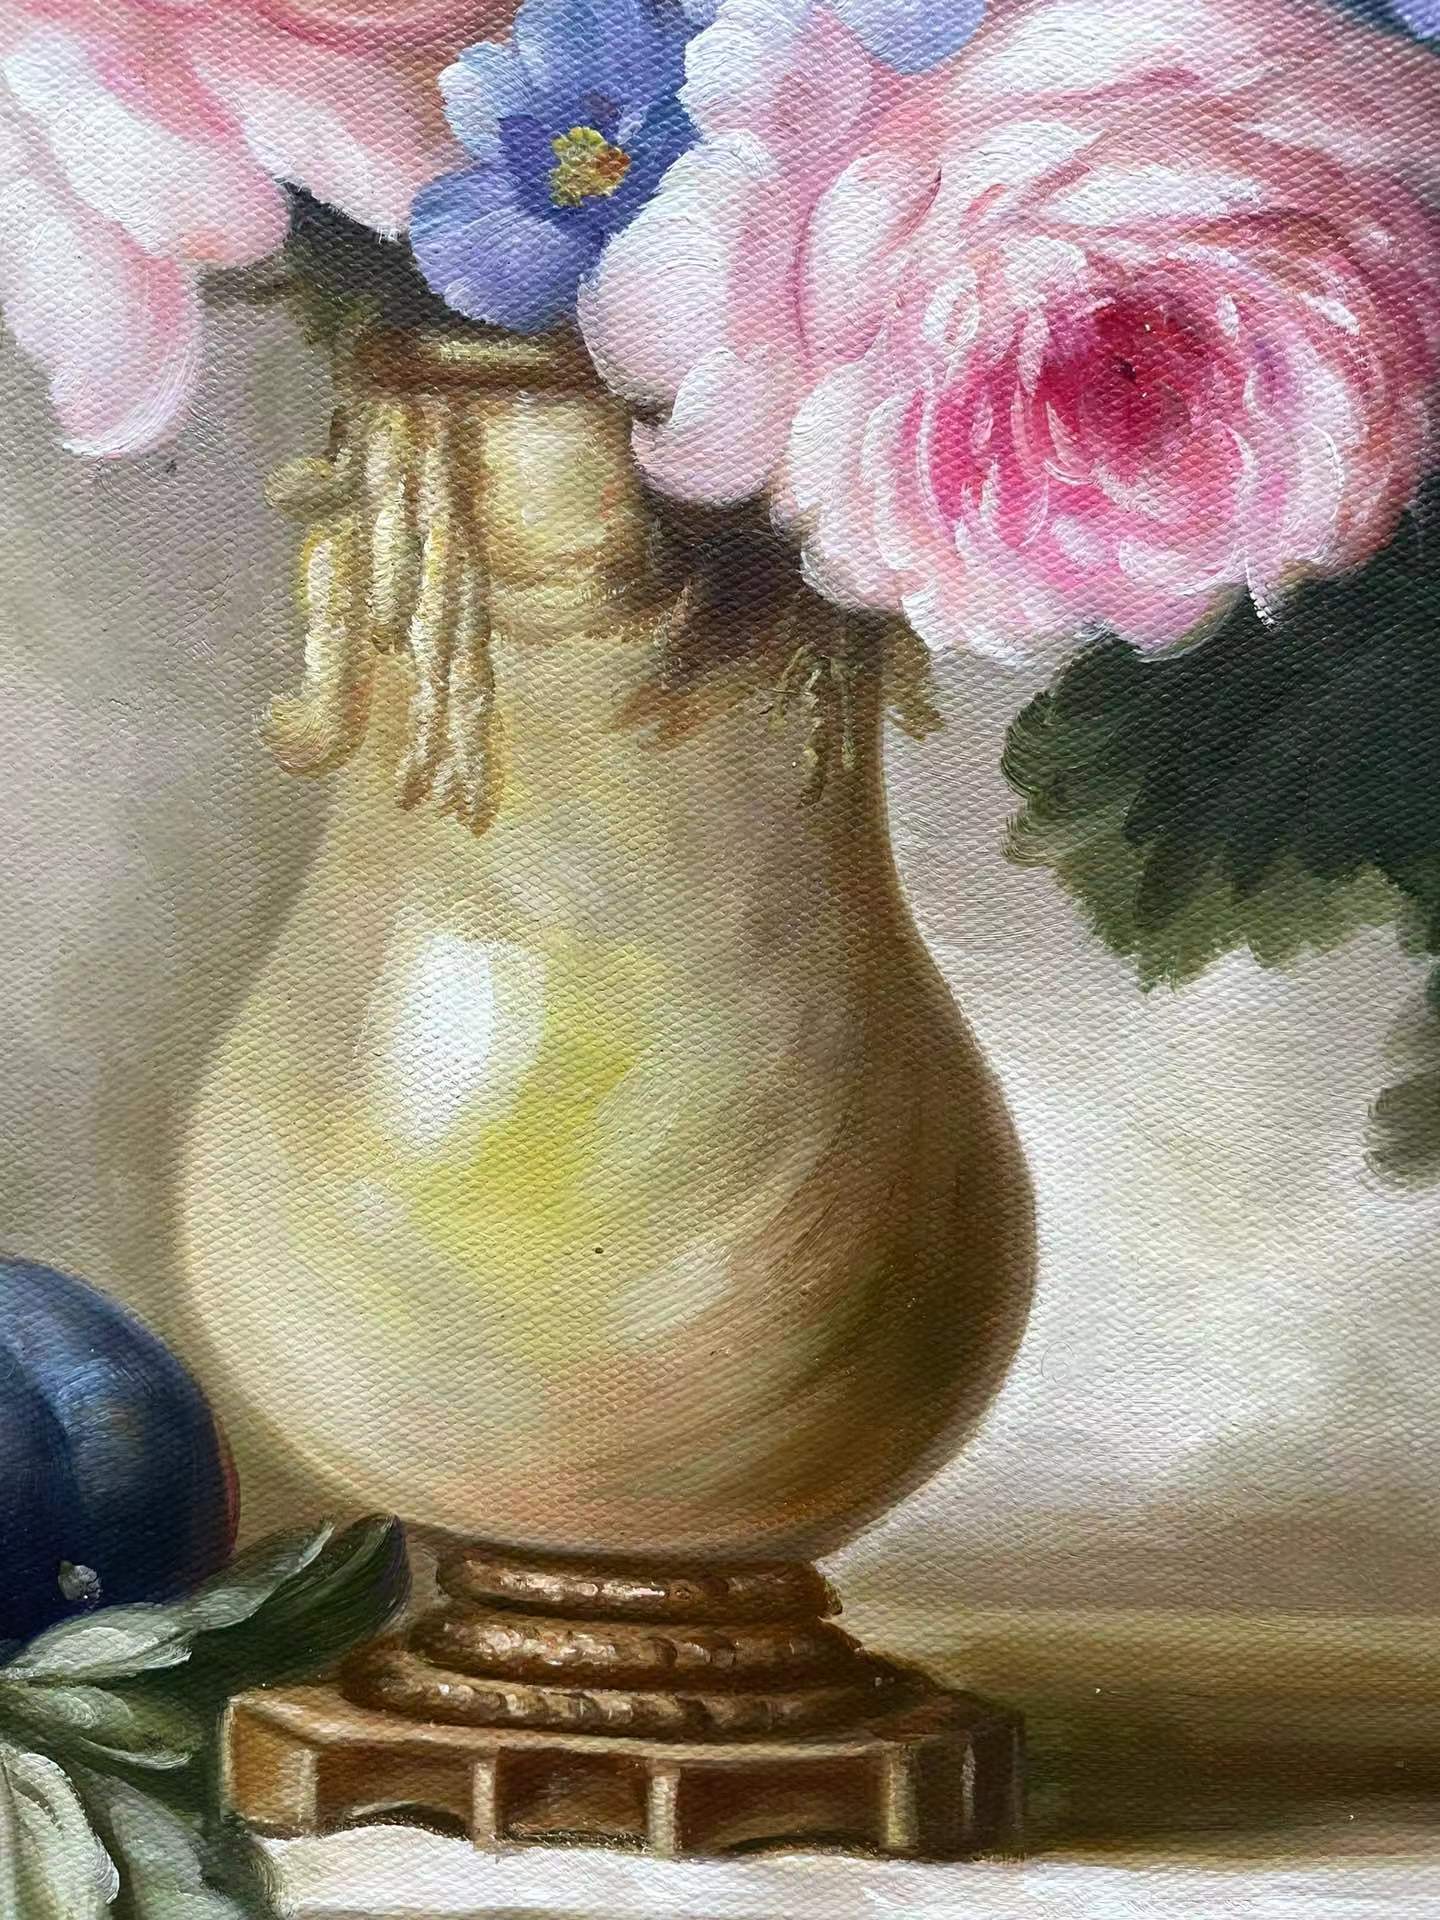 100 Handmade Oil Painting on Canvas Still Life Realism flower painting 20 by 24 M2031